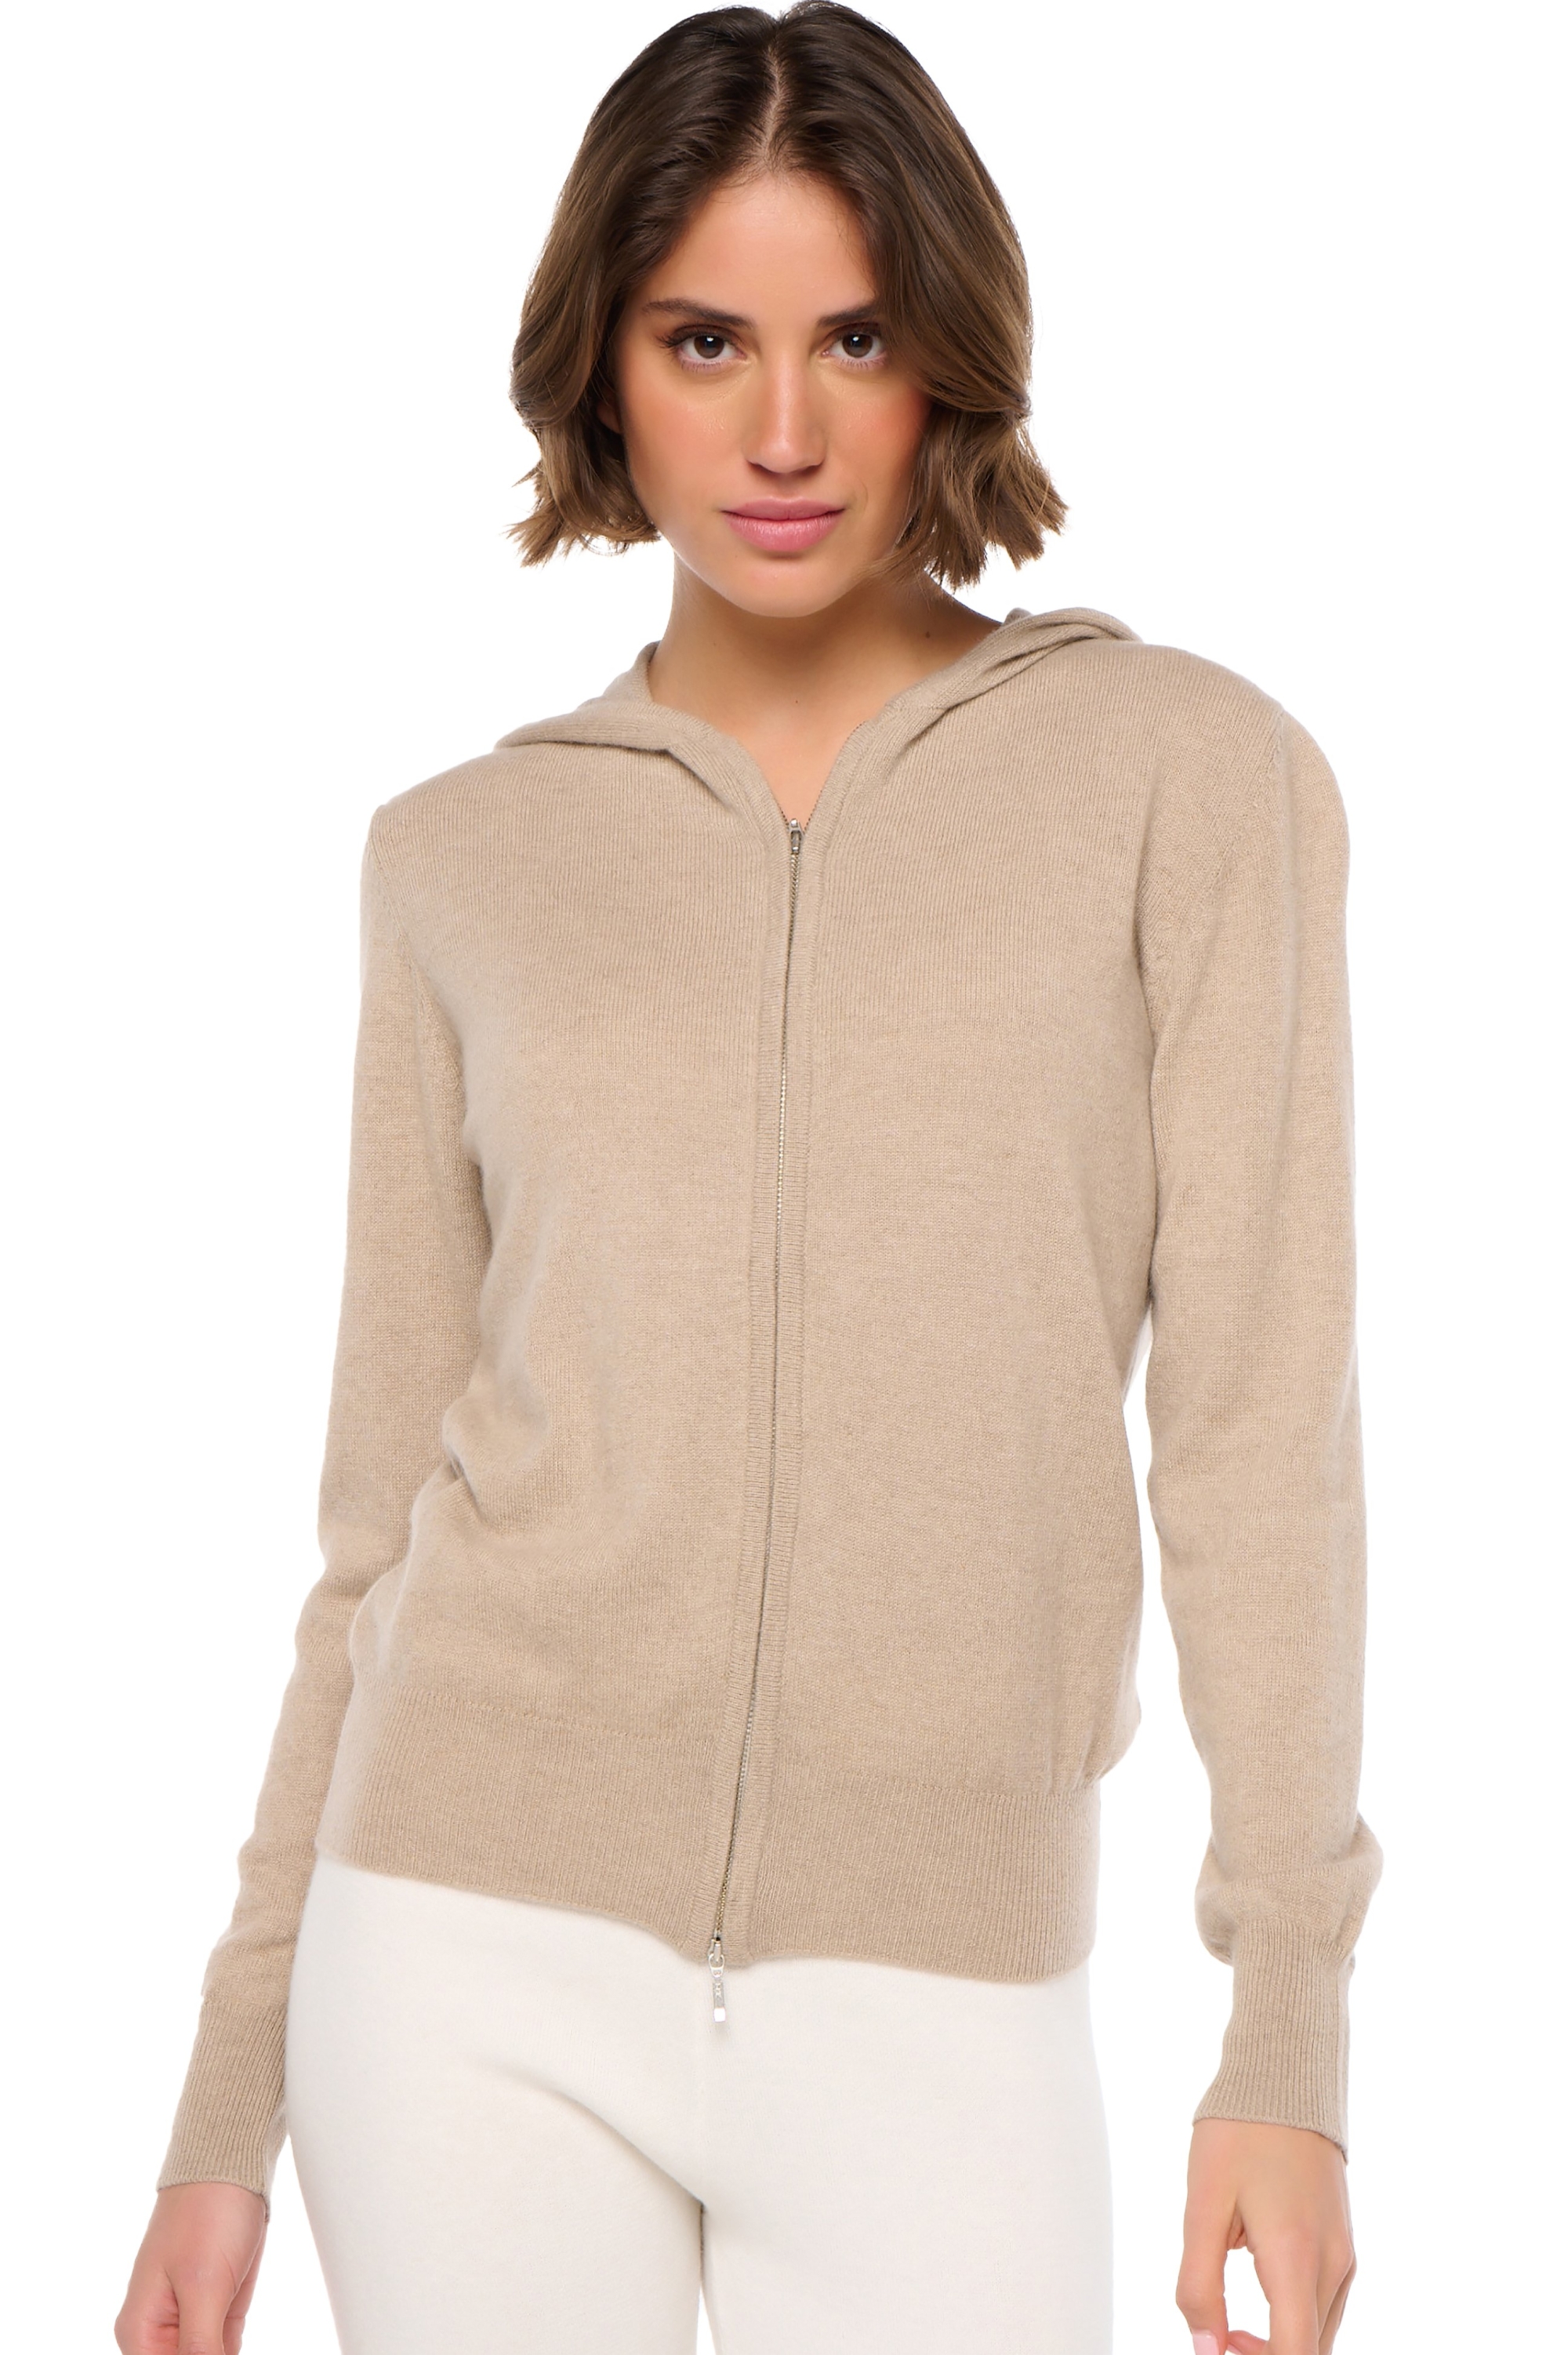 Cashmere ladies zip hood louanne natural stone s